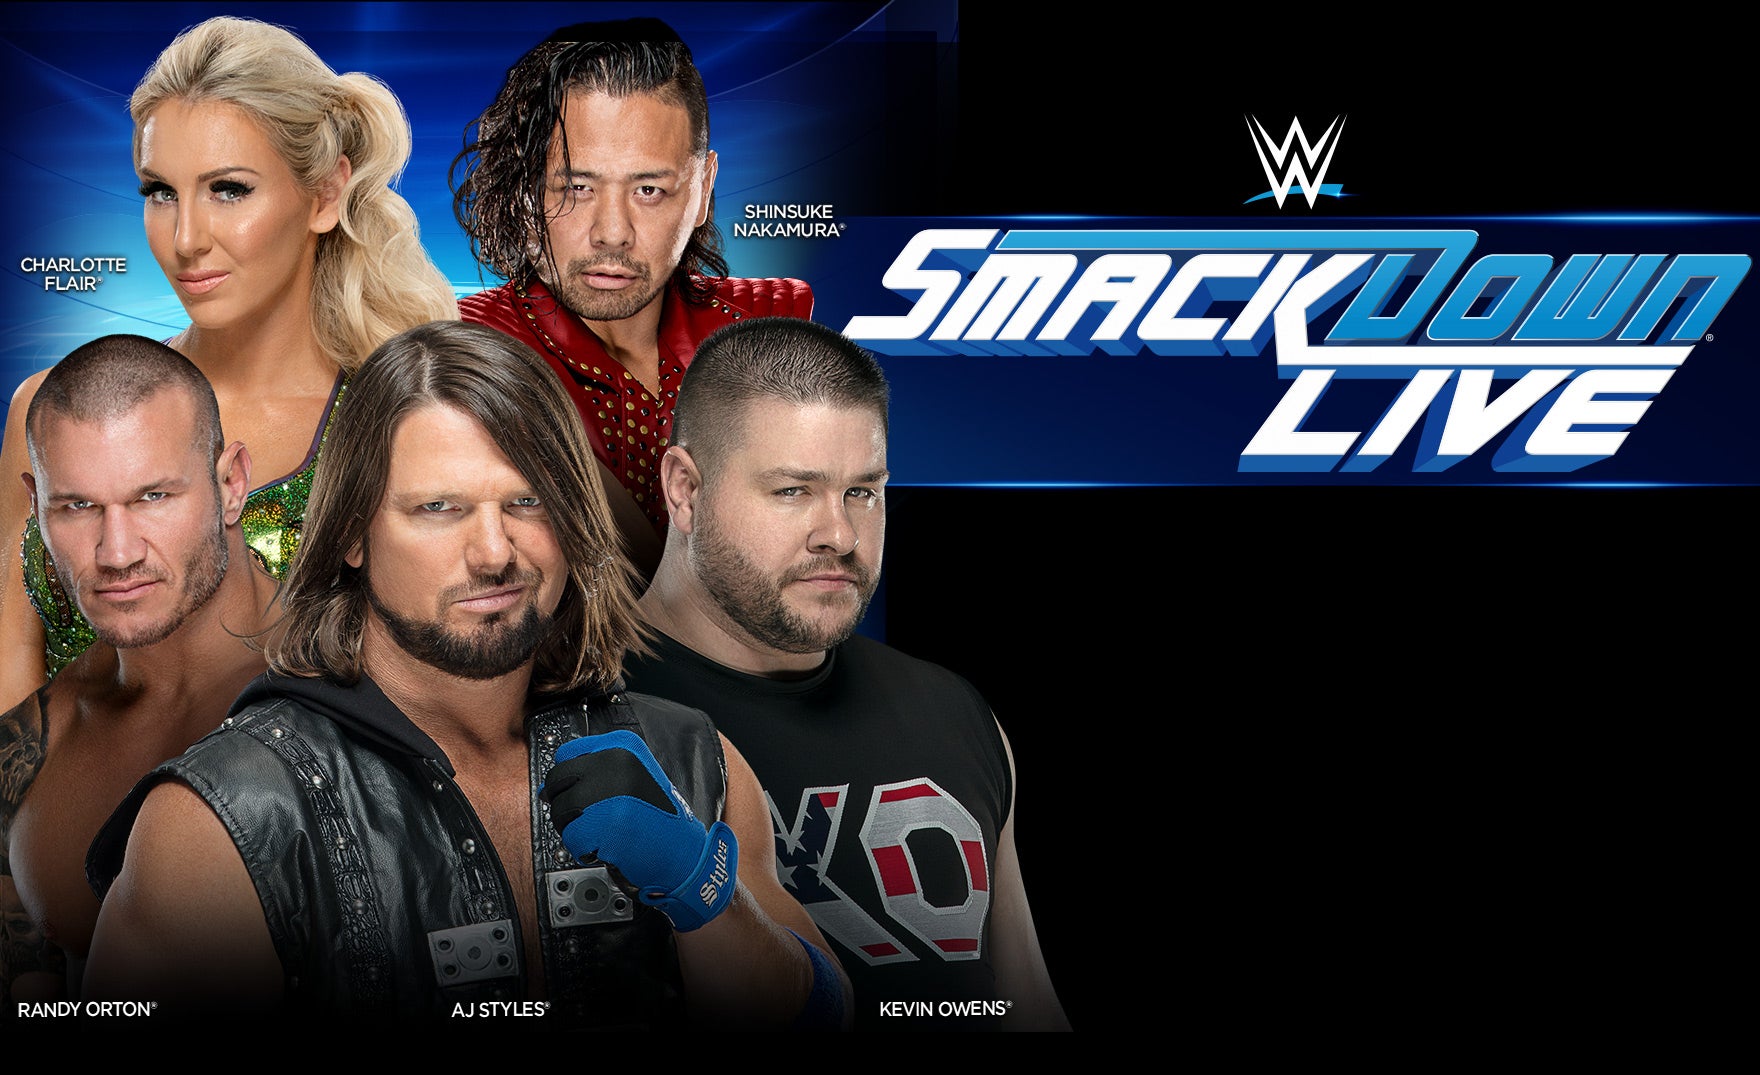 WWE Smackdown Live PPG Paints Arena